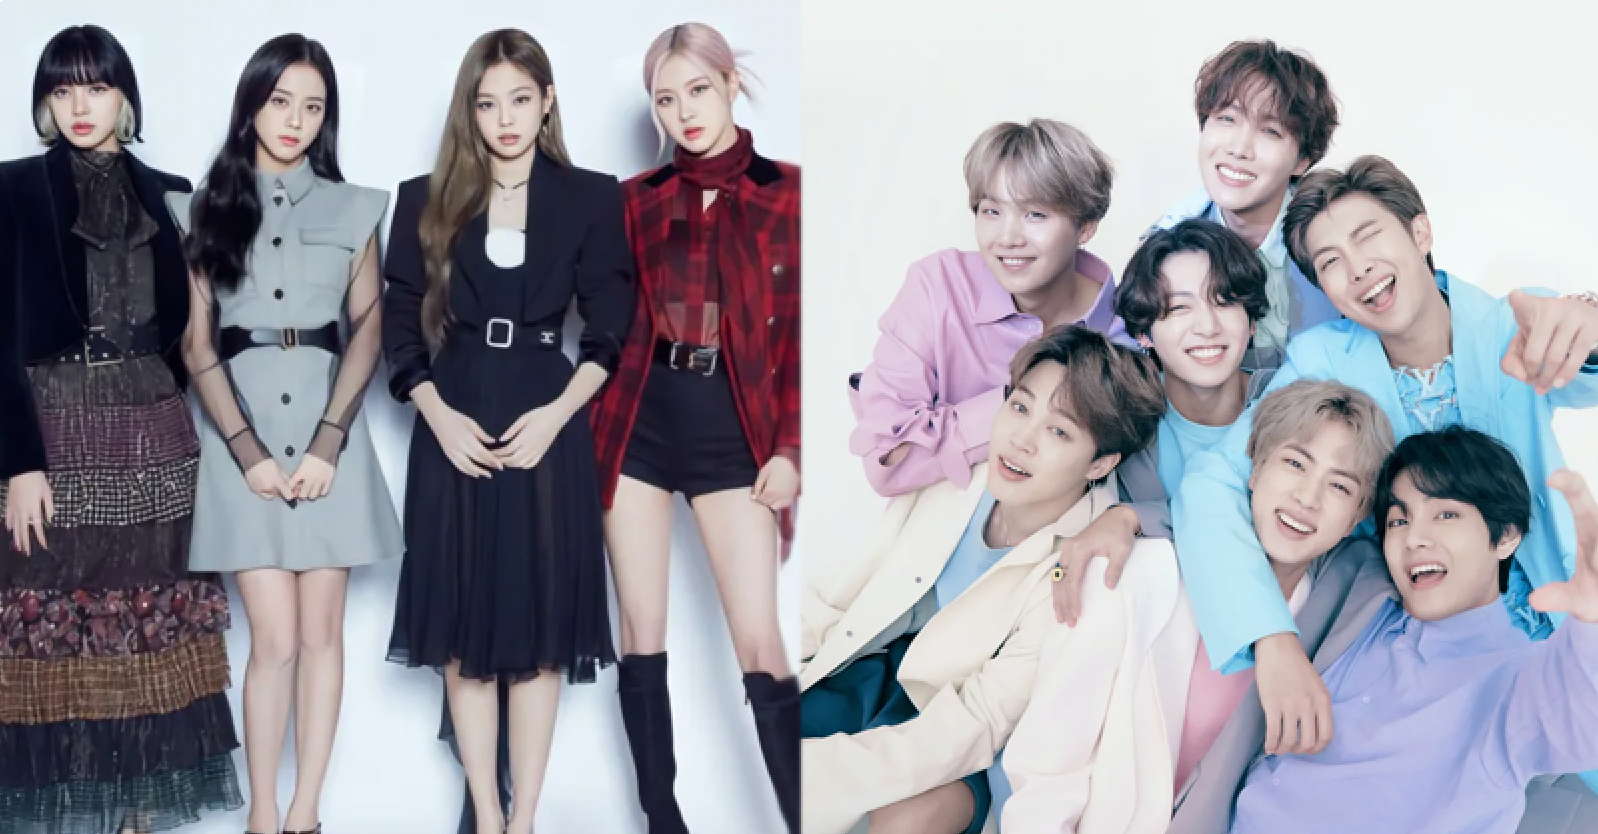 Male And Female K-Pop Fans Voted For Their Favorite Groups Separately